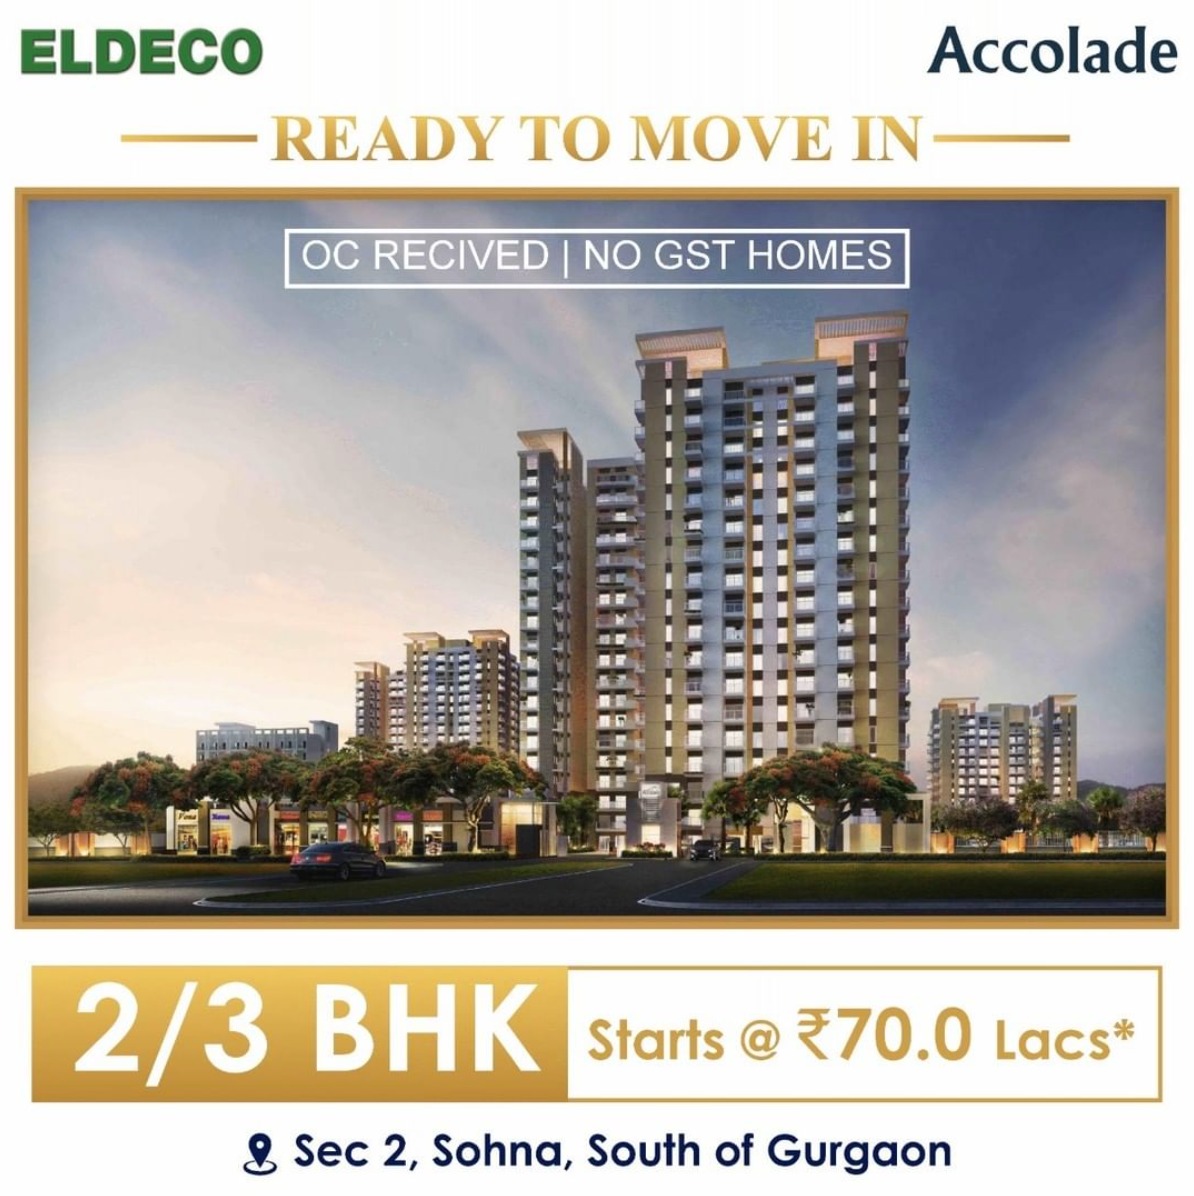 2 & 3 BHkK Starts From Rs 70 Lacs at Eldeco in Sector 2 Sohna, South Of Gurgaon Update